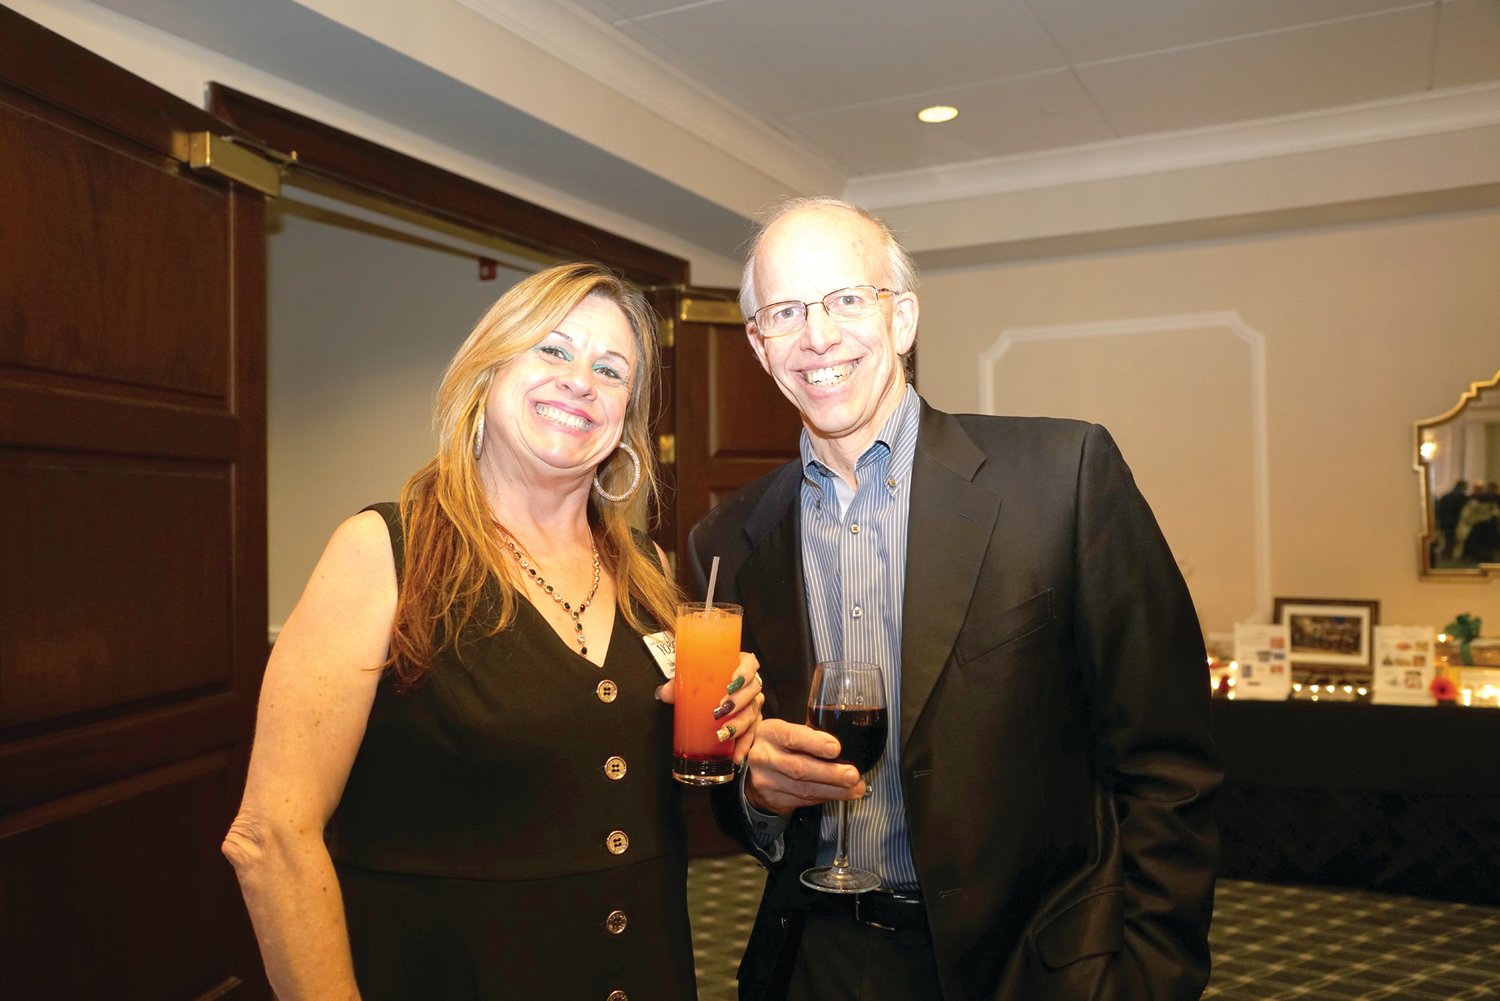 Terri Grace, a member of the YOBC board of directors, poses with Paul Clough, former board president.